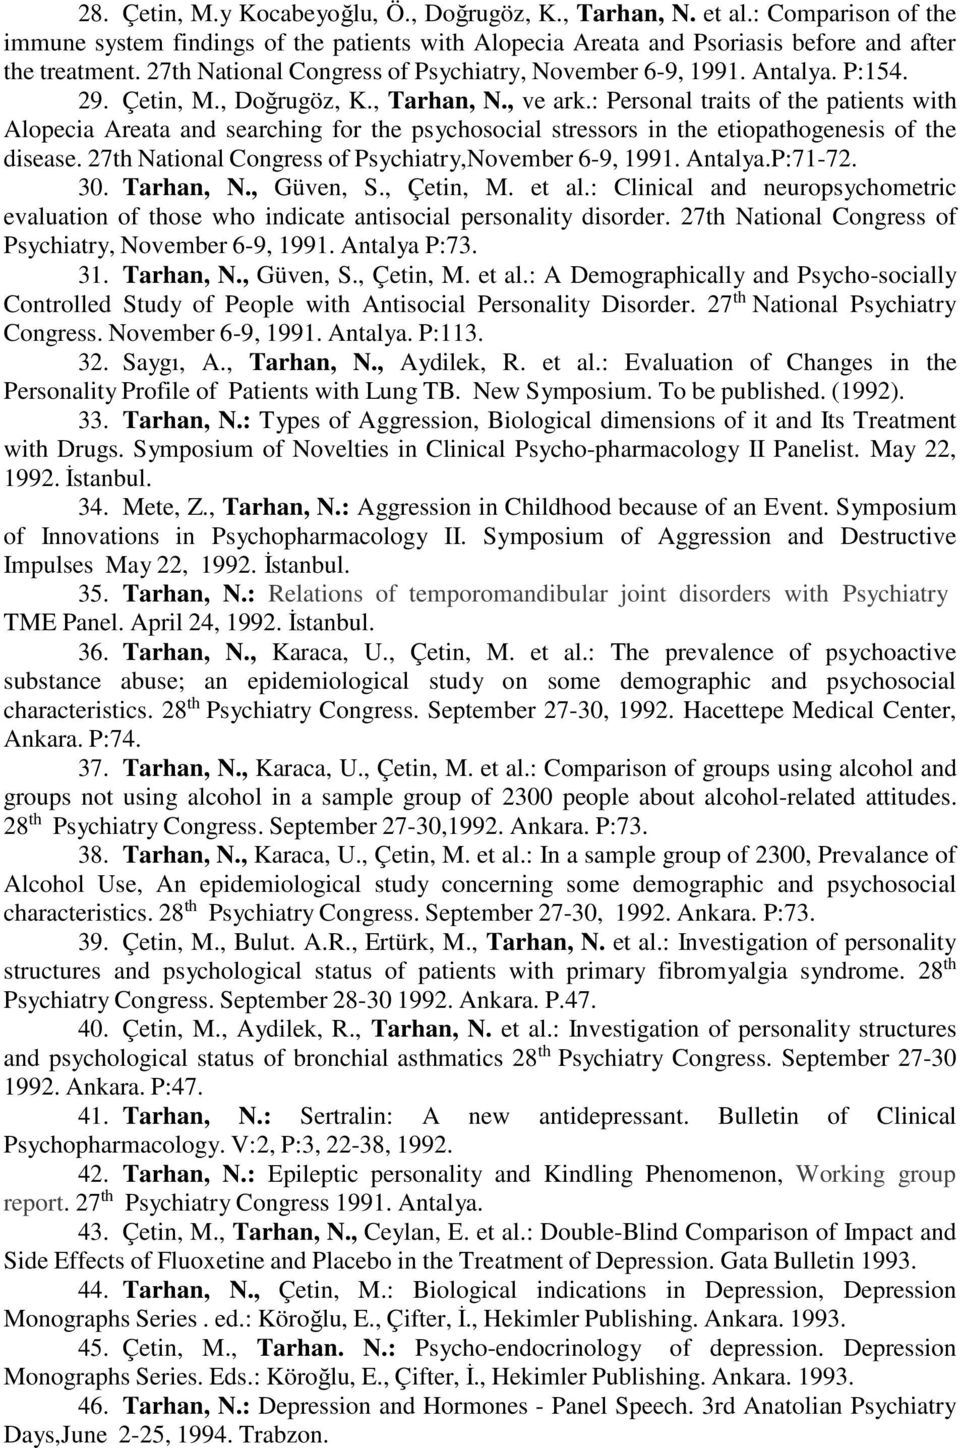 : Personal traits of the patients with Alopecia Areata and searching for the psychosocial stressors in the etiopathogenesis of the disease. 27th National Congress of Psychiatry,November 6-9, 1991.